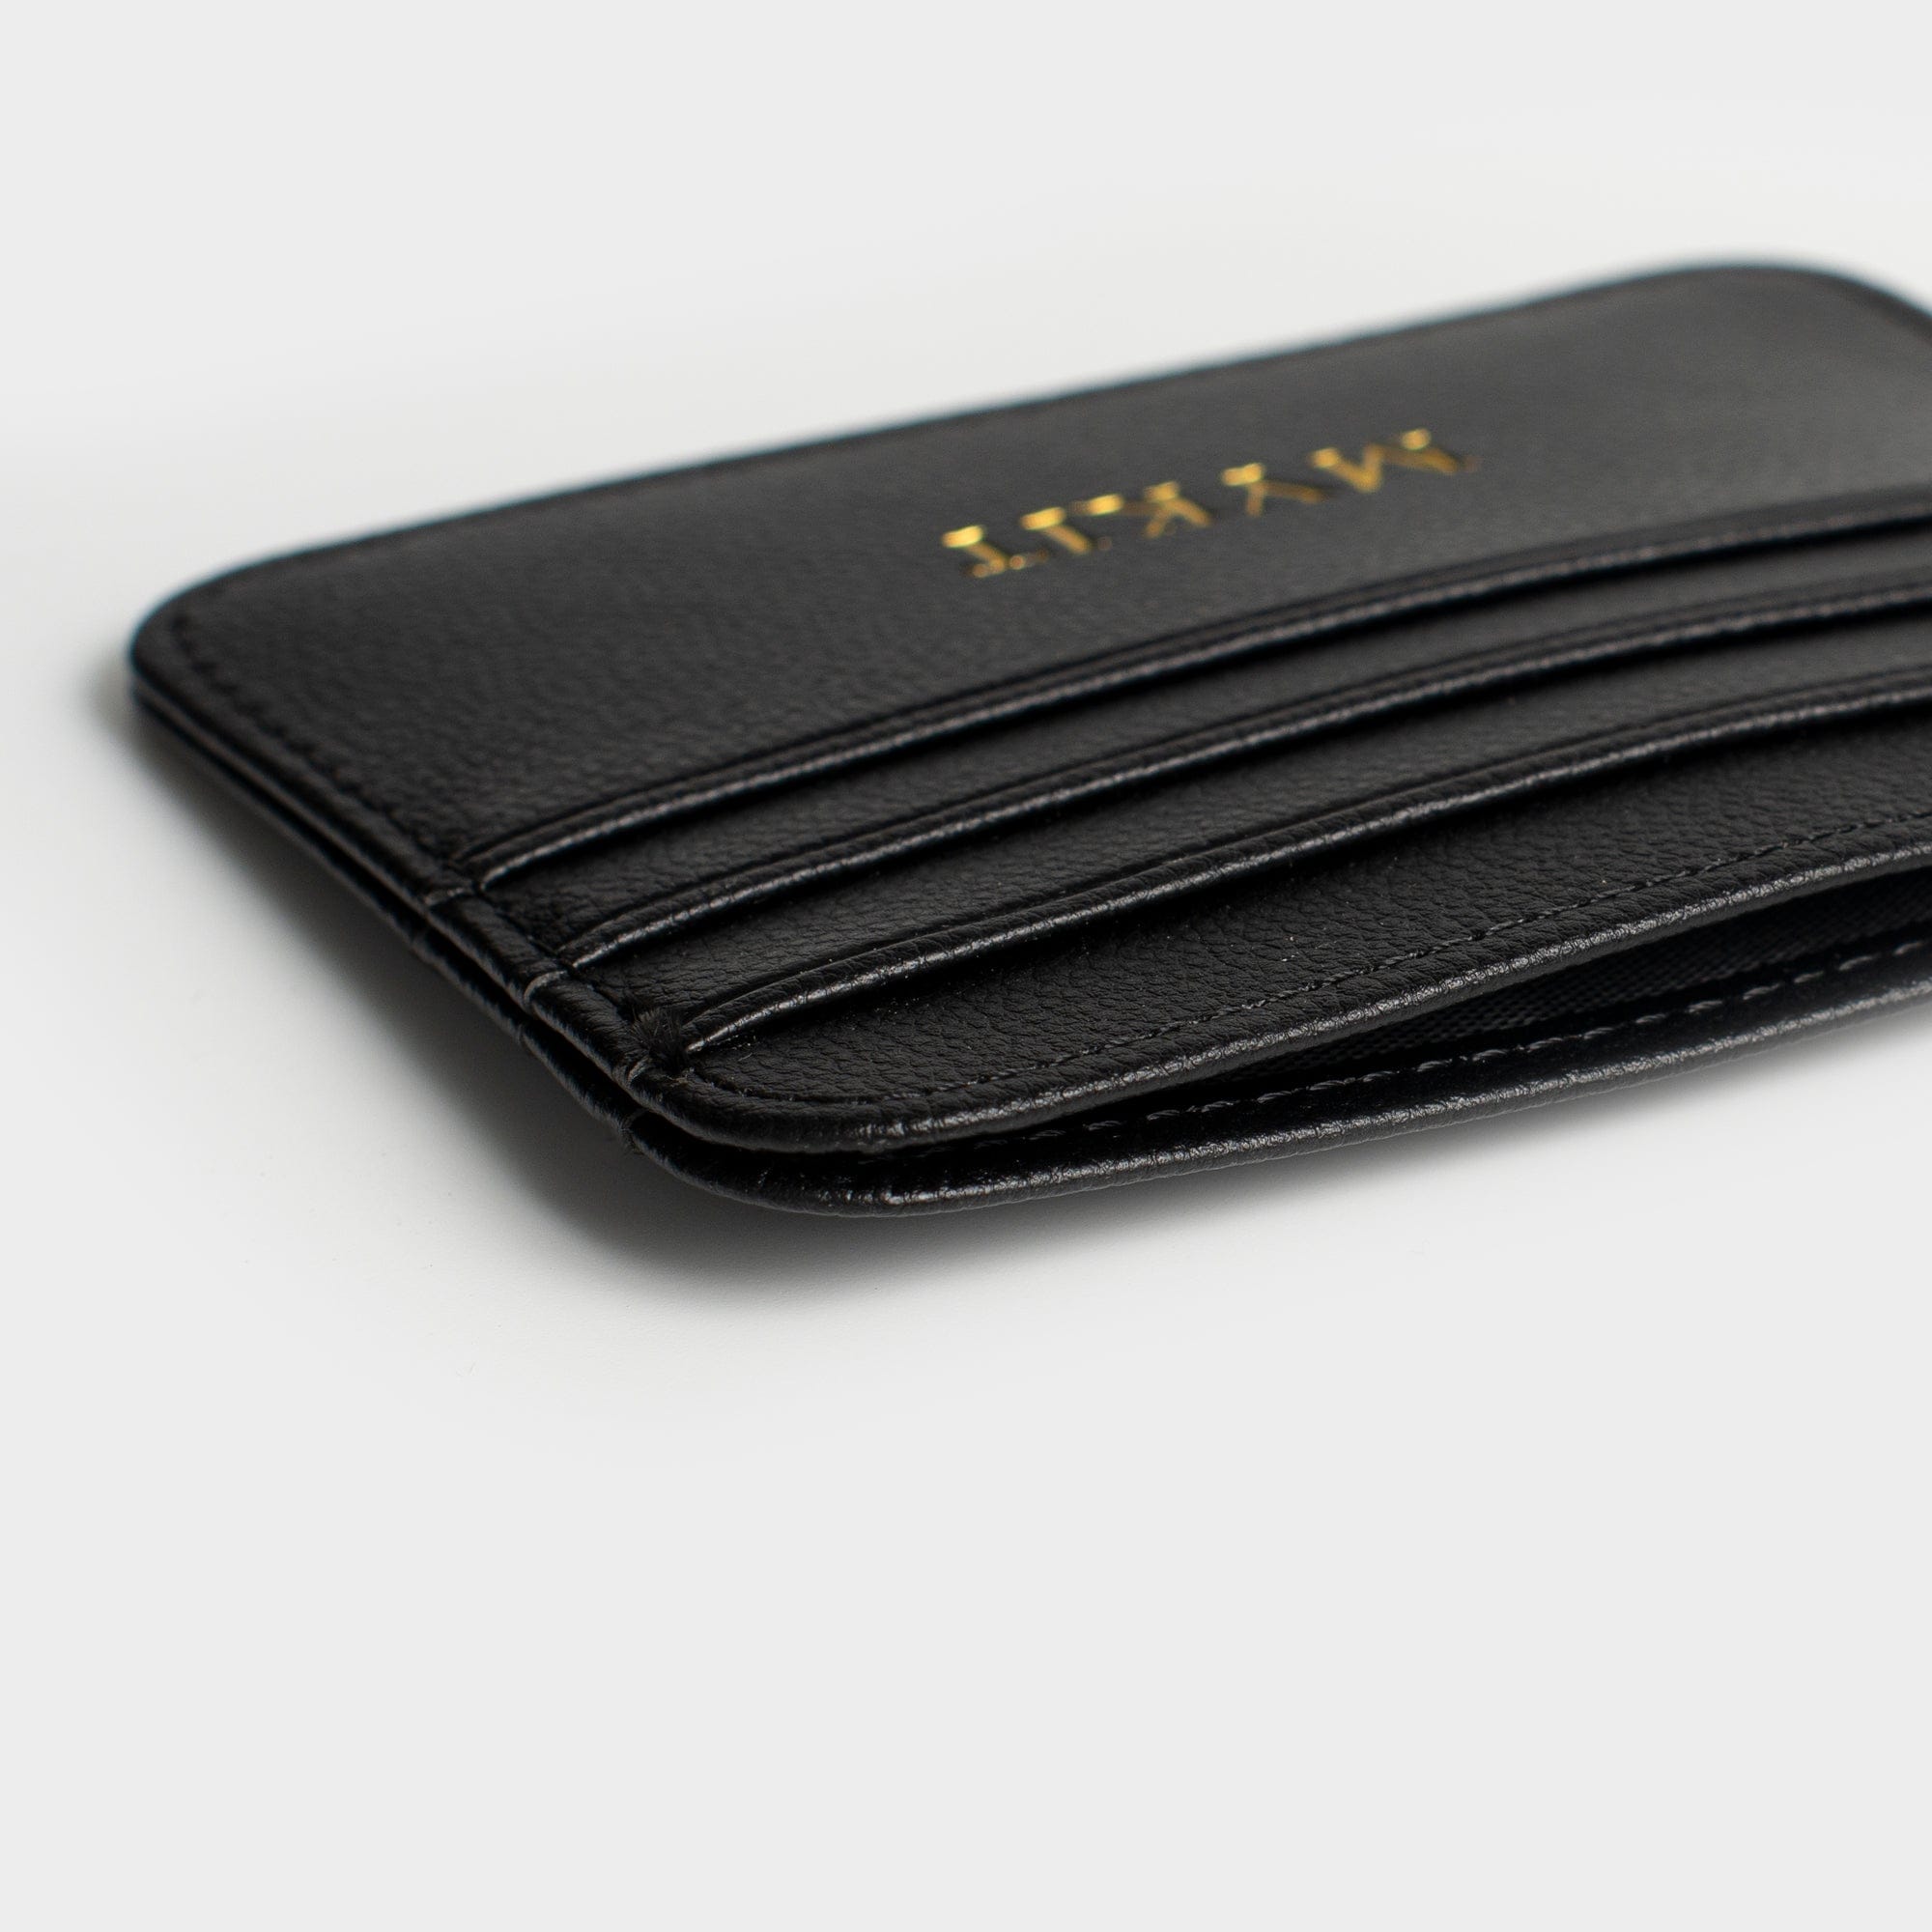 Black Grain Texture Personalized Card Holder